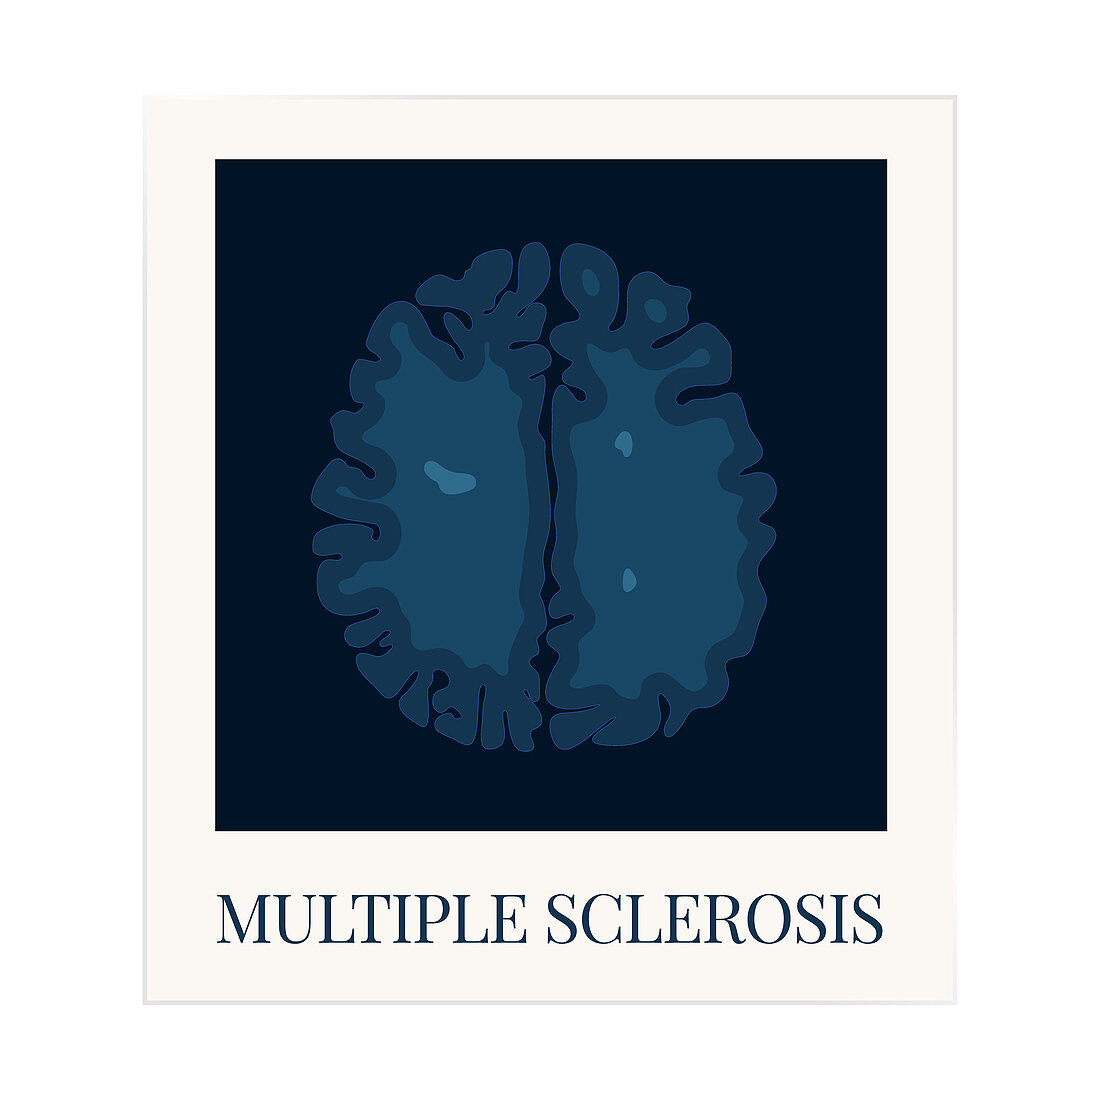 Brain affected by multiple sclerosis, illustration